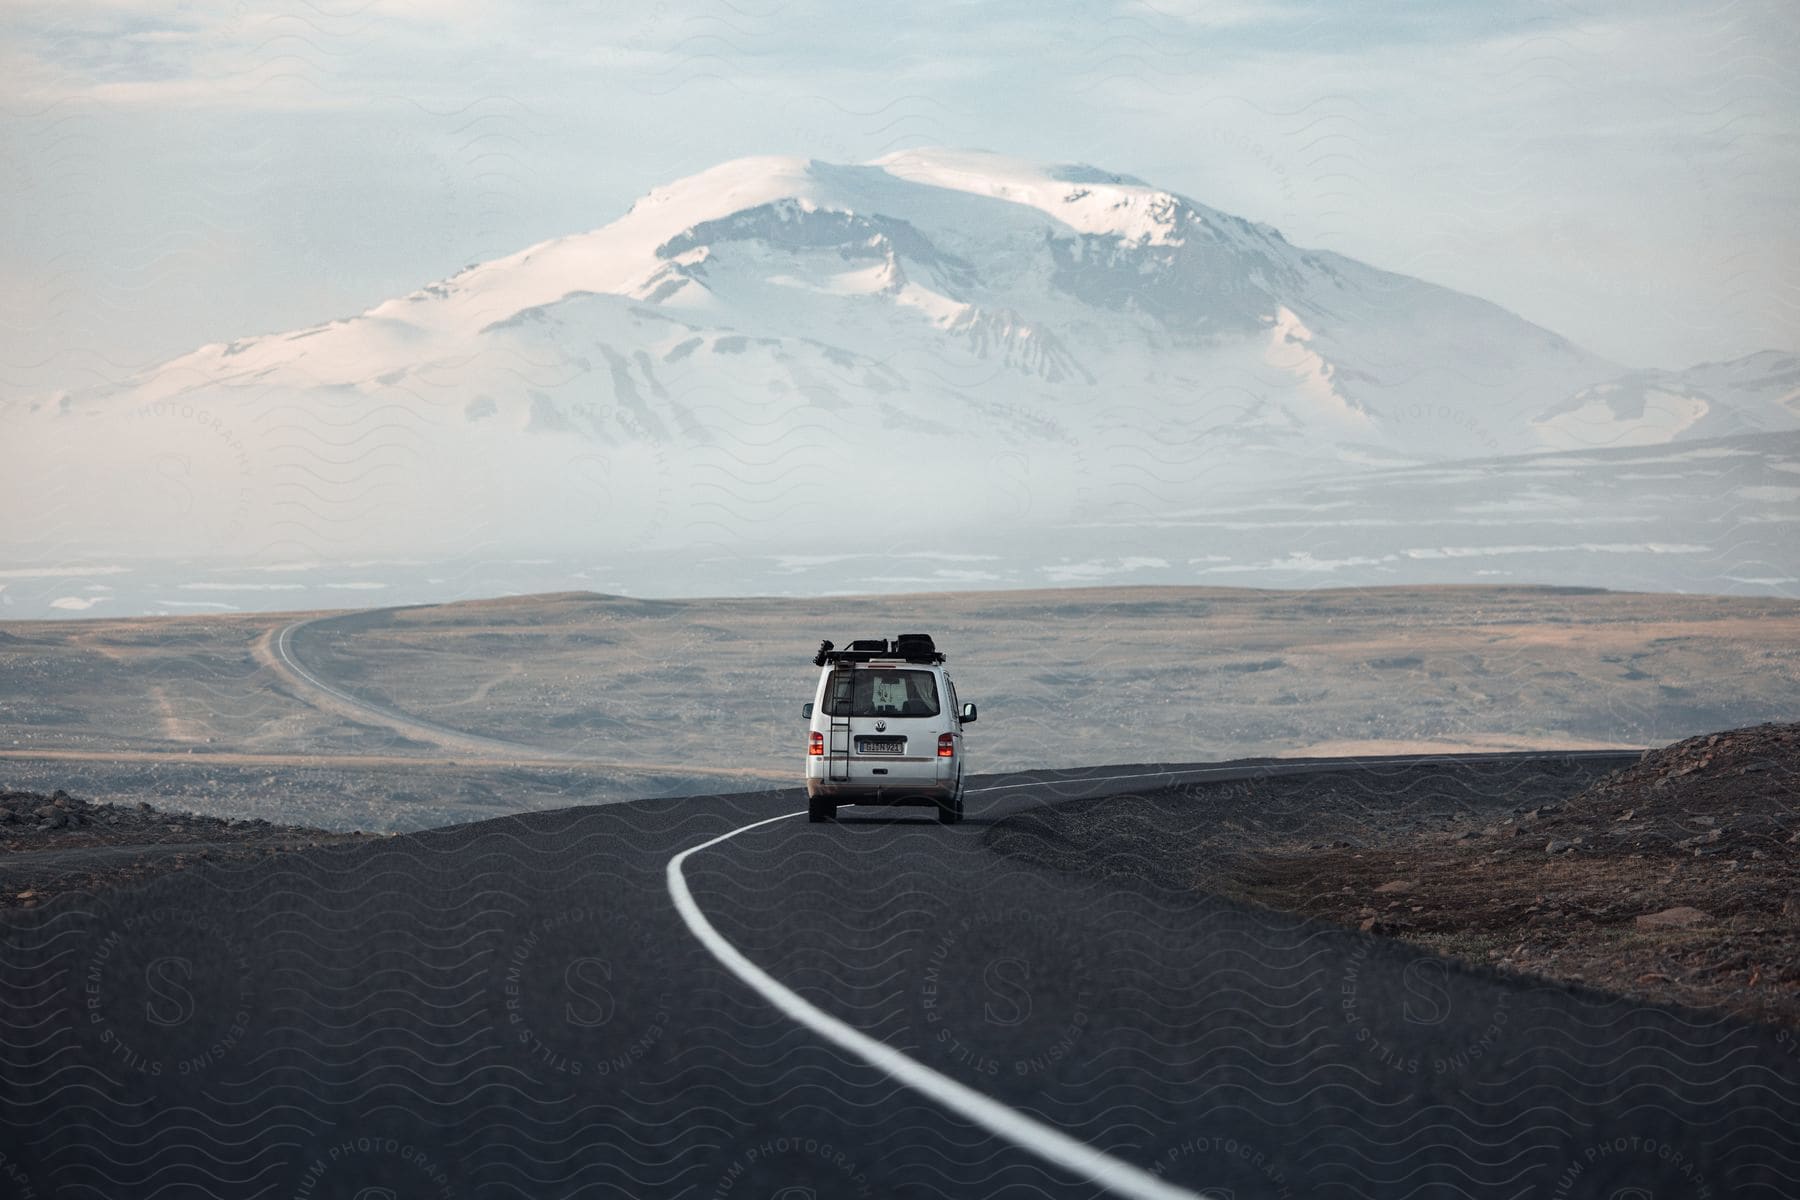 A white van travels on a road toward a snow covered mountain under a cloudy sky